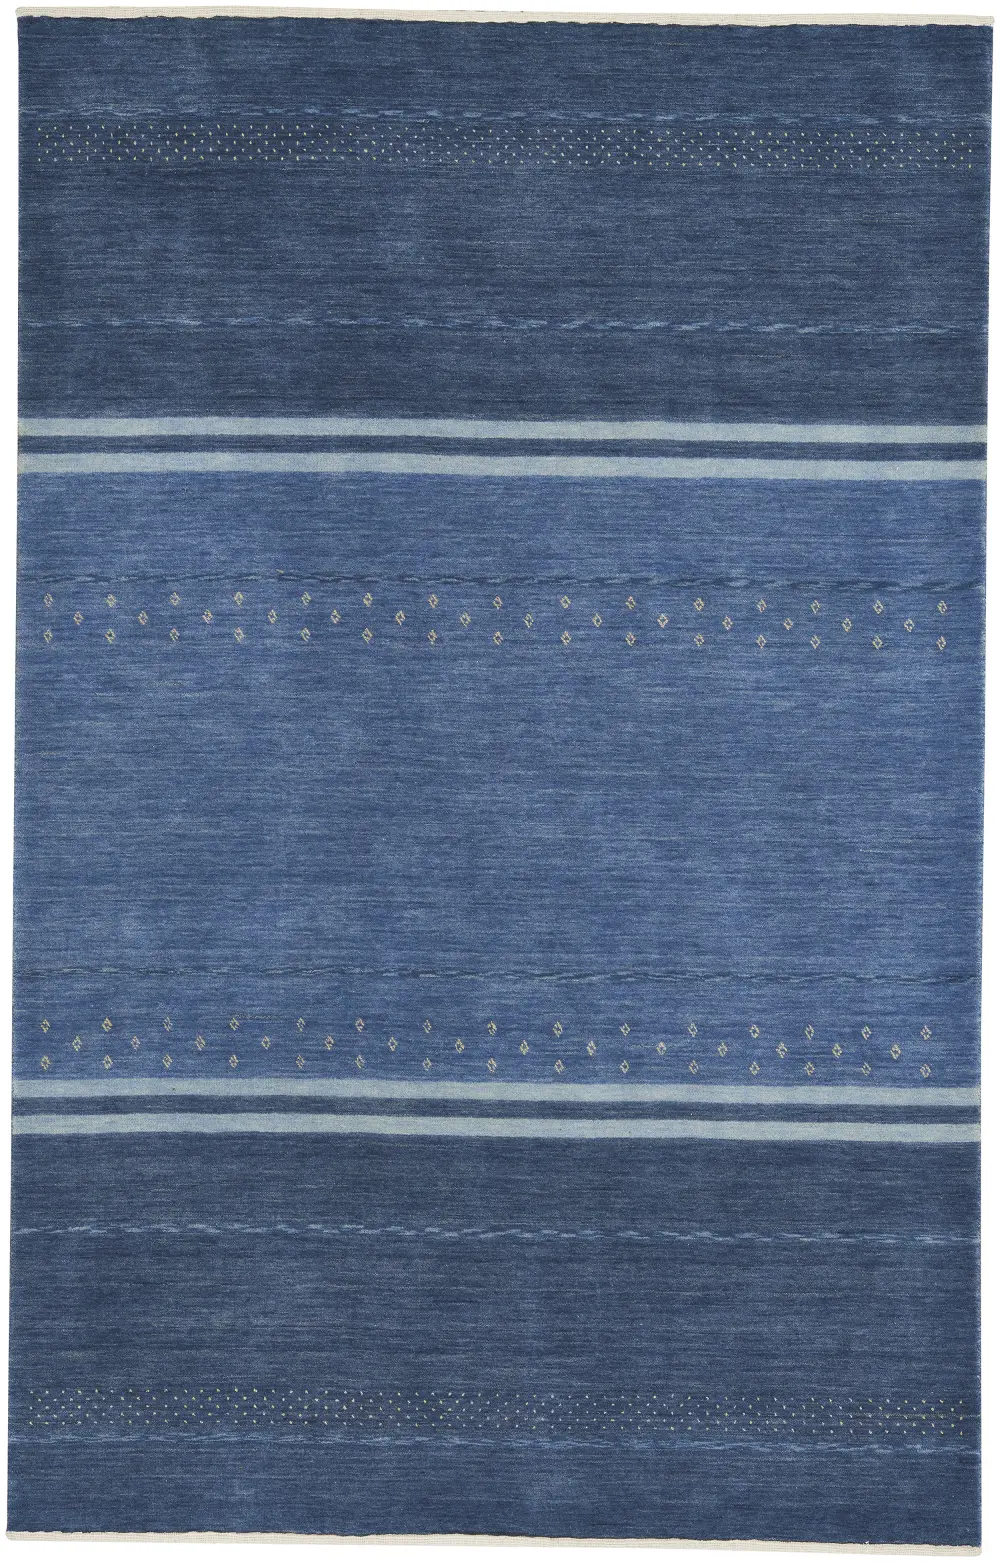 3495RS08001000440 8 x 10 Large Taos Blue Area Rug - Simply Gabbeh-1